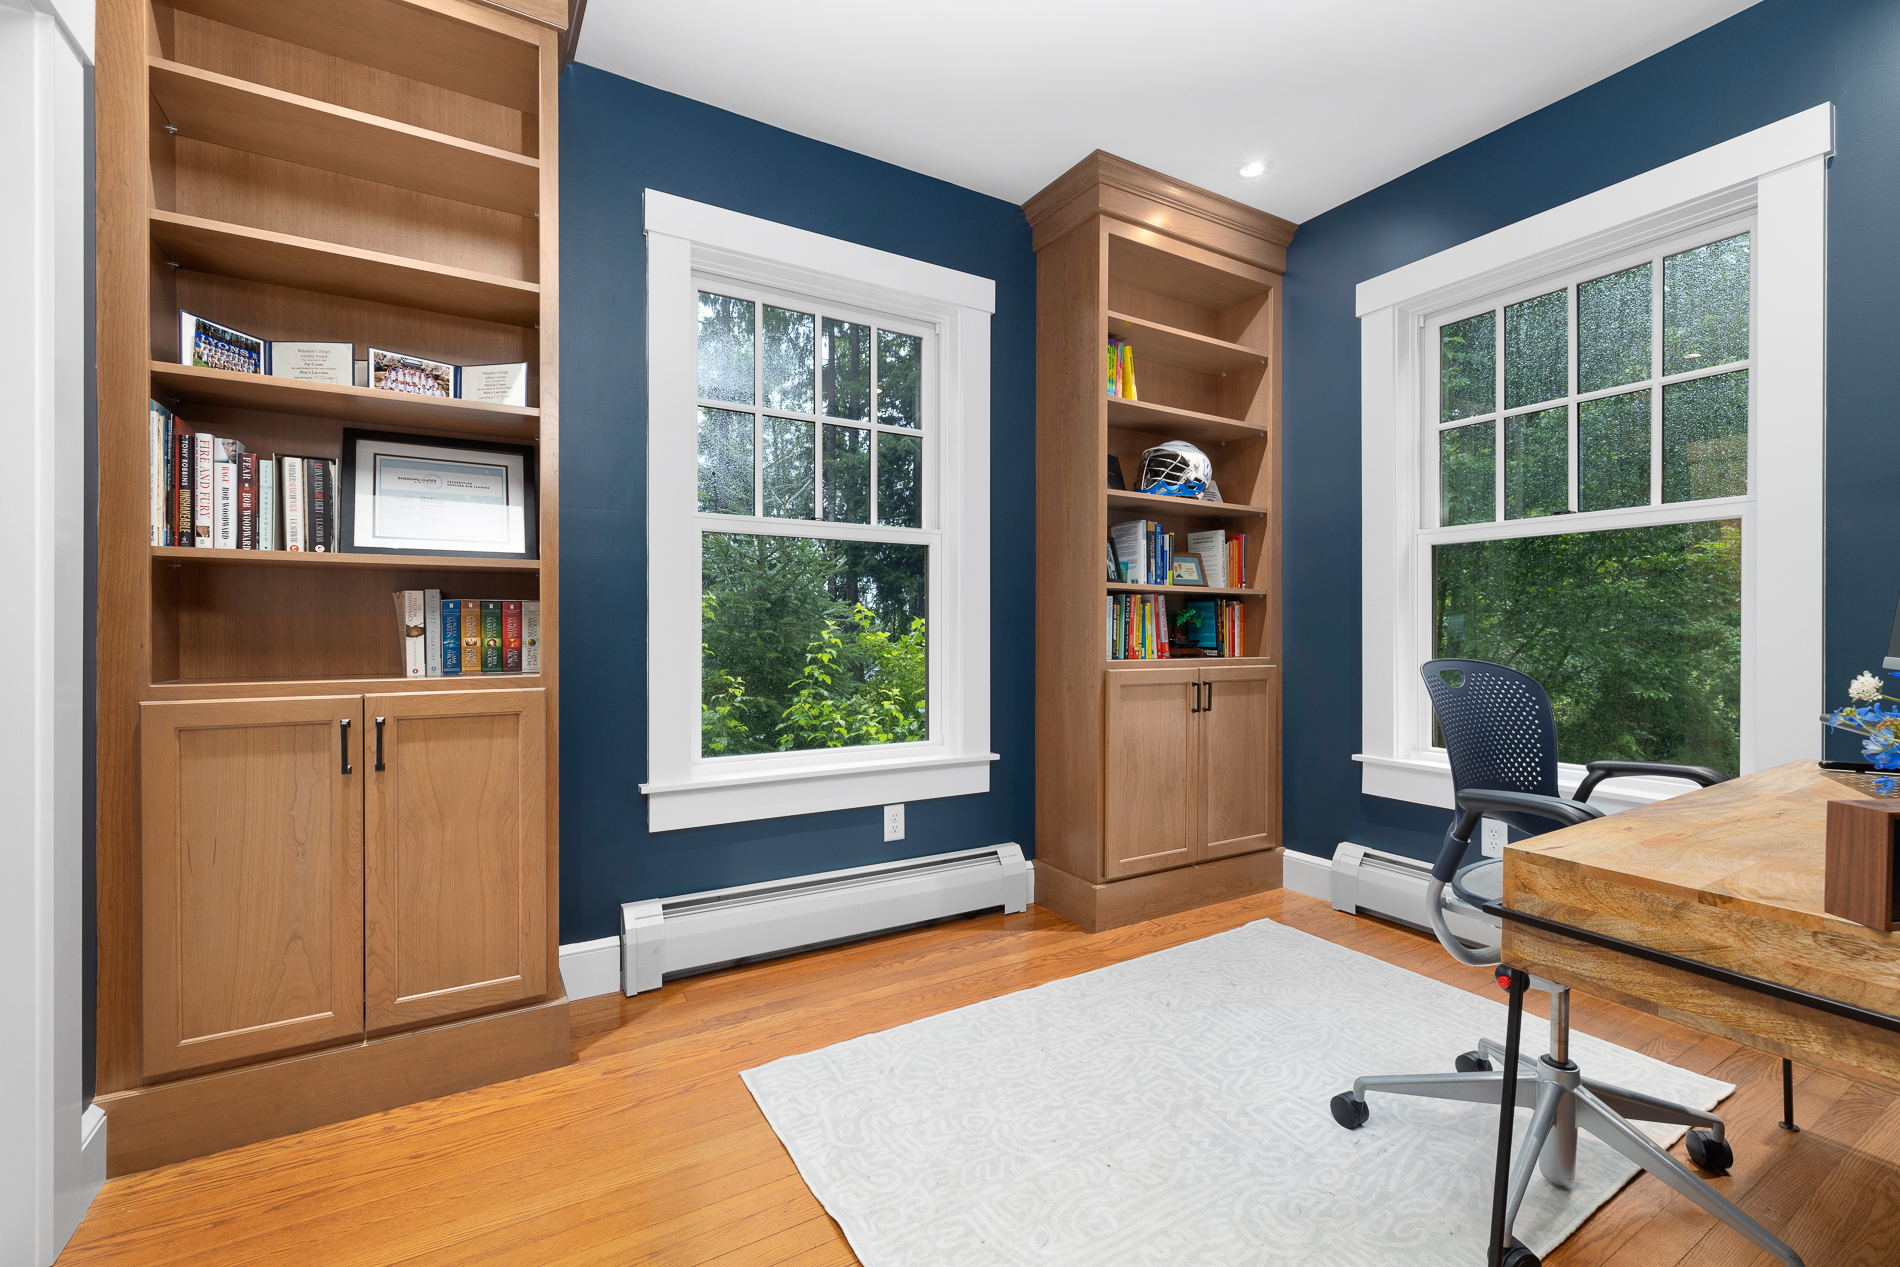 Remodeled home office with bookcases, wood floor, and two large double-hung windows with grids on top. Dark blue walls, and woodgrain desk in right corner.